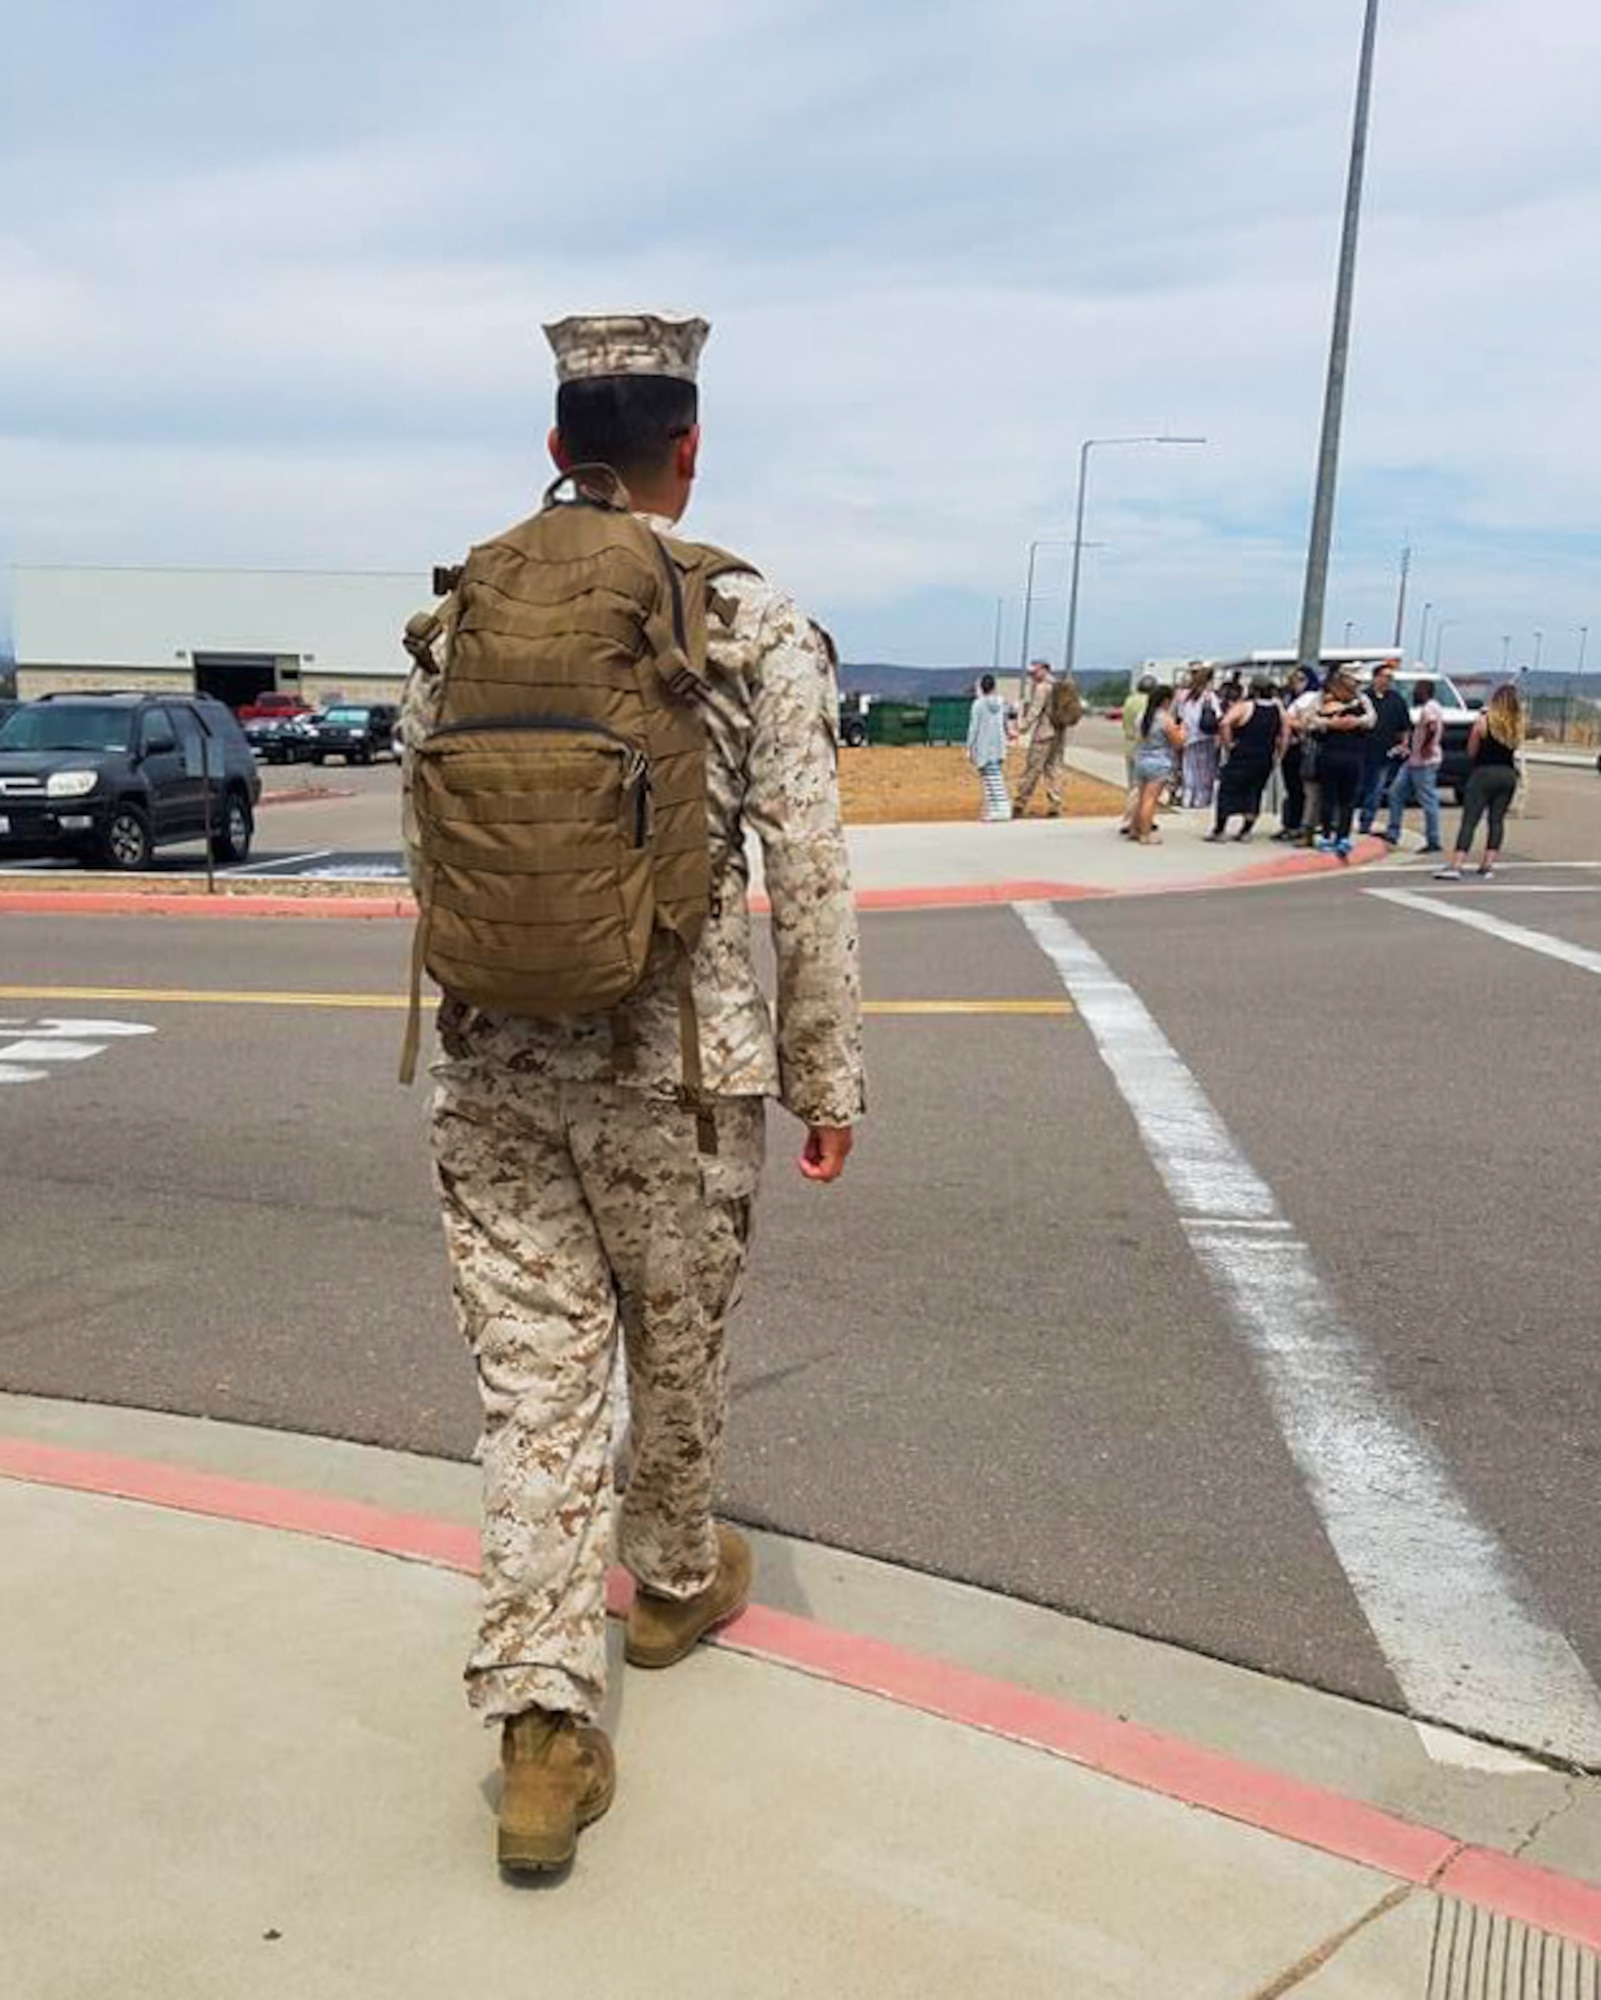 Then, U.S. Marine Corps Lance Cpl. Gerardo Verdugo, fixed-wing crew chief, walks towards a tram on Marine Corps Air Station Miramar, Calif., July 25, 2016. Verdugo deployed in support of the Special Purpose Marine Ground Task Force. (U.S. Space Force photo by Airman 1st Class Dakota Raub)